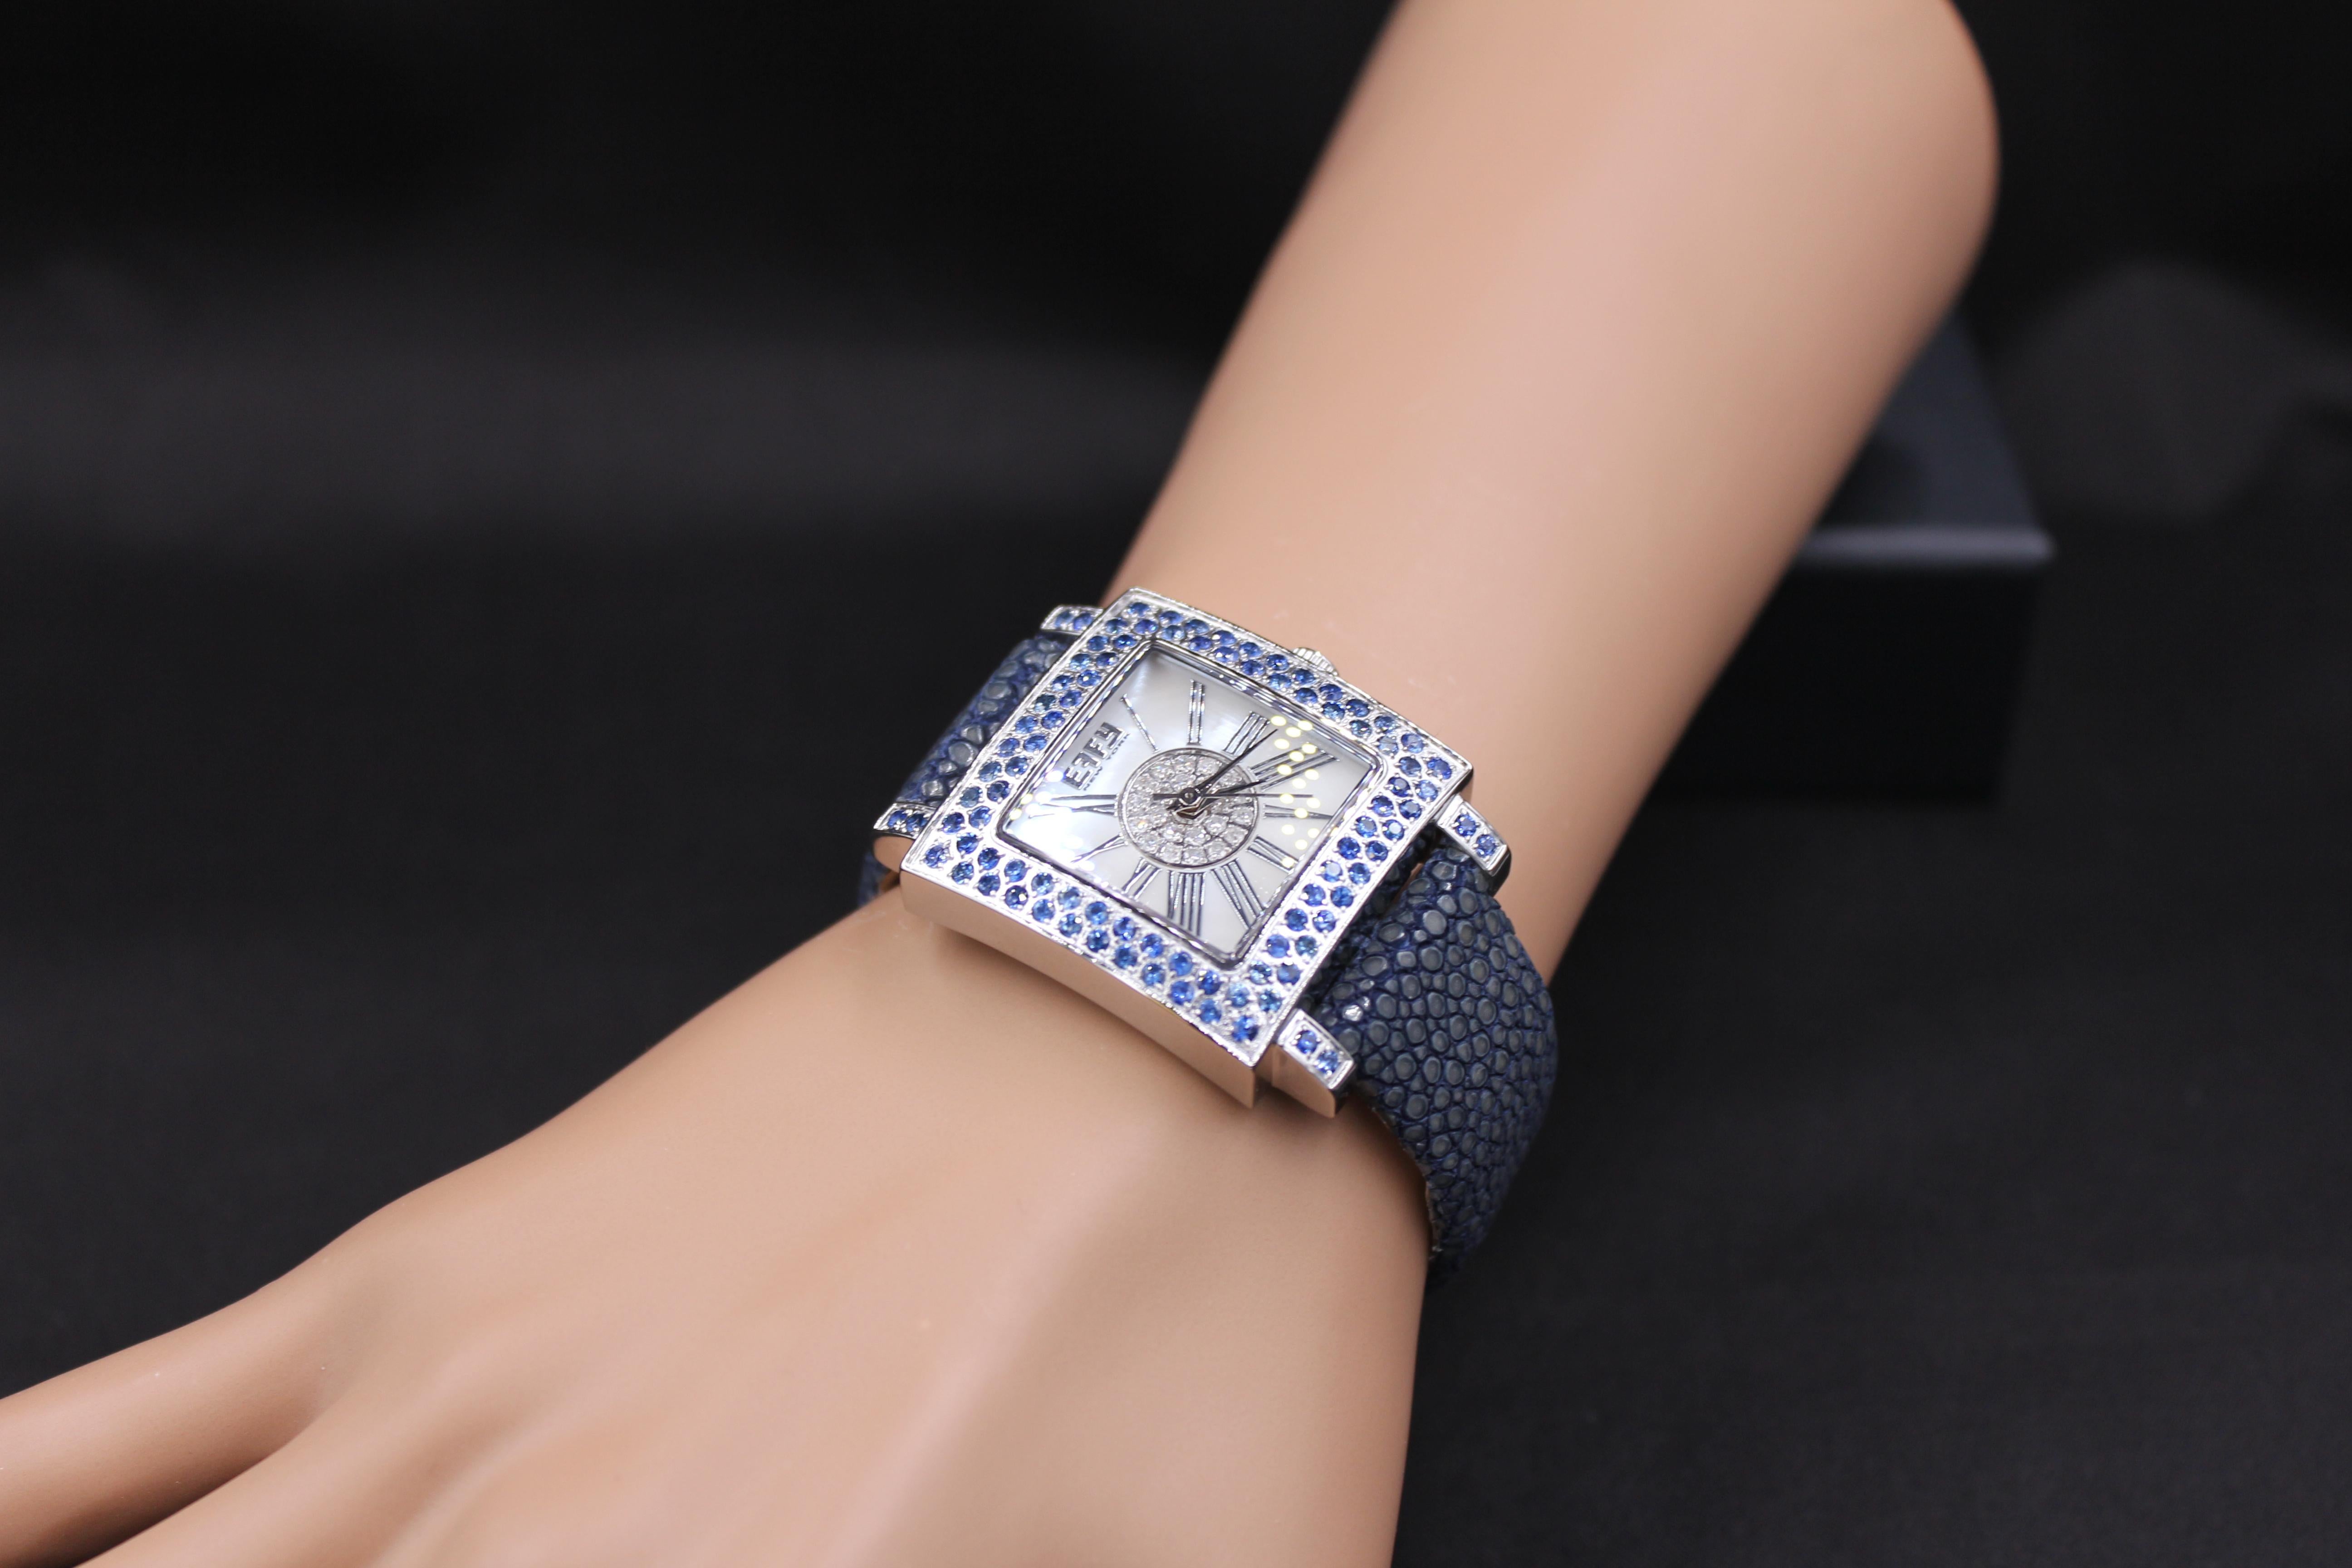 ·      Quality Swiss-Quartz movement guarantees precision timing
·         Mother-of-Pearl dial micro-paved with diamonds and gemstones enhances any dress style
·         Scratch-resistant sapphire glass lens
·         Genuine exotic stingray 